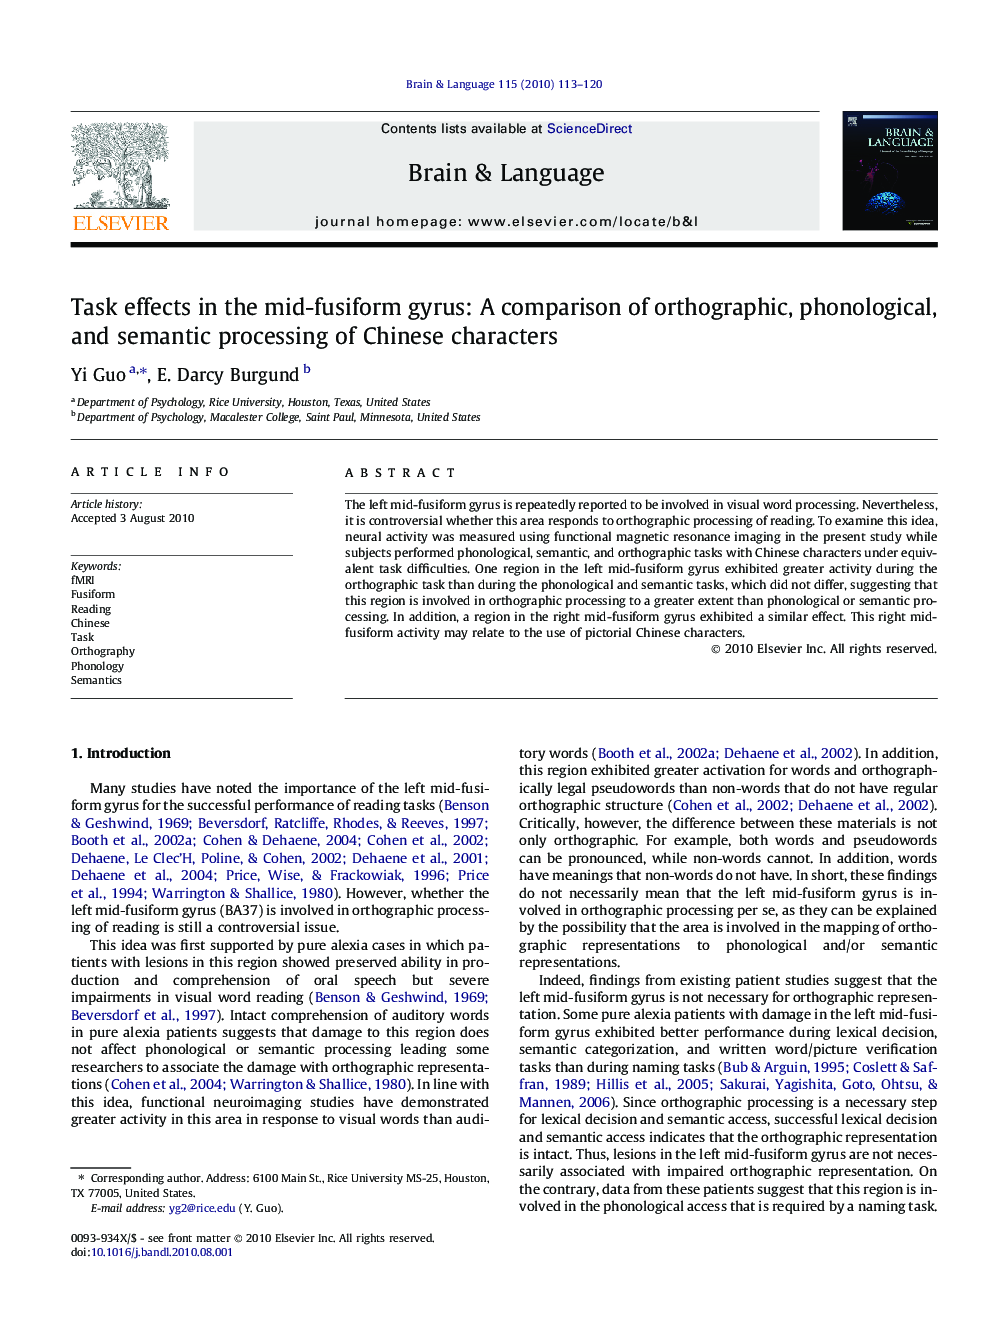 Task effects in the mid-fusiform gyrus: A comparison of orthographic, phonological, and semantic processing of Chinese characters